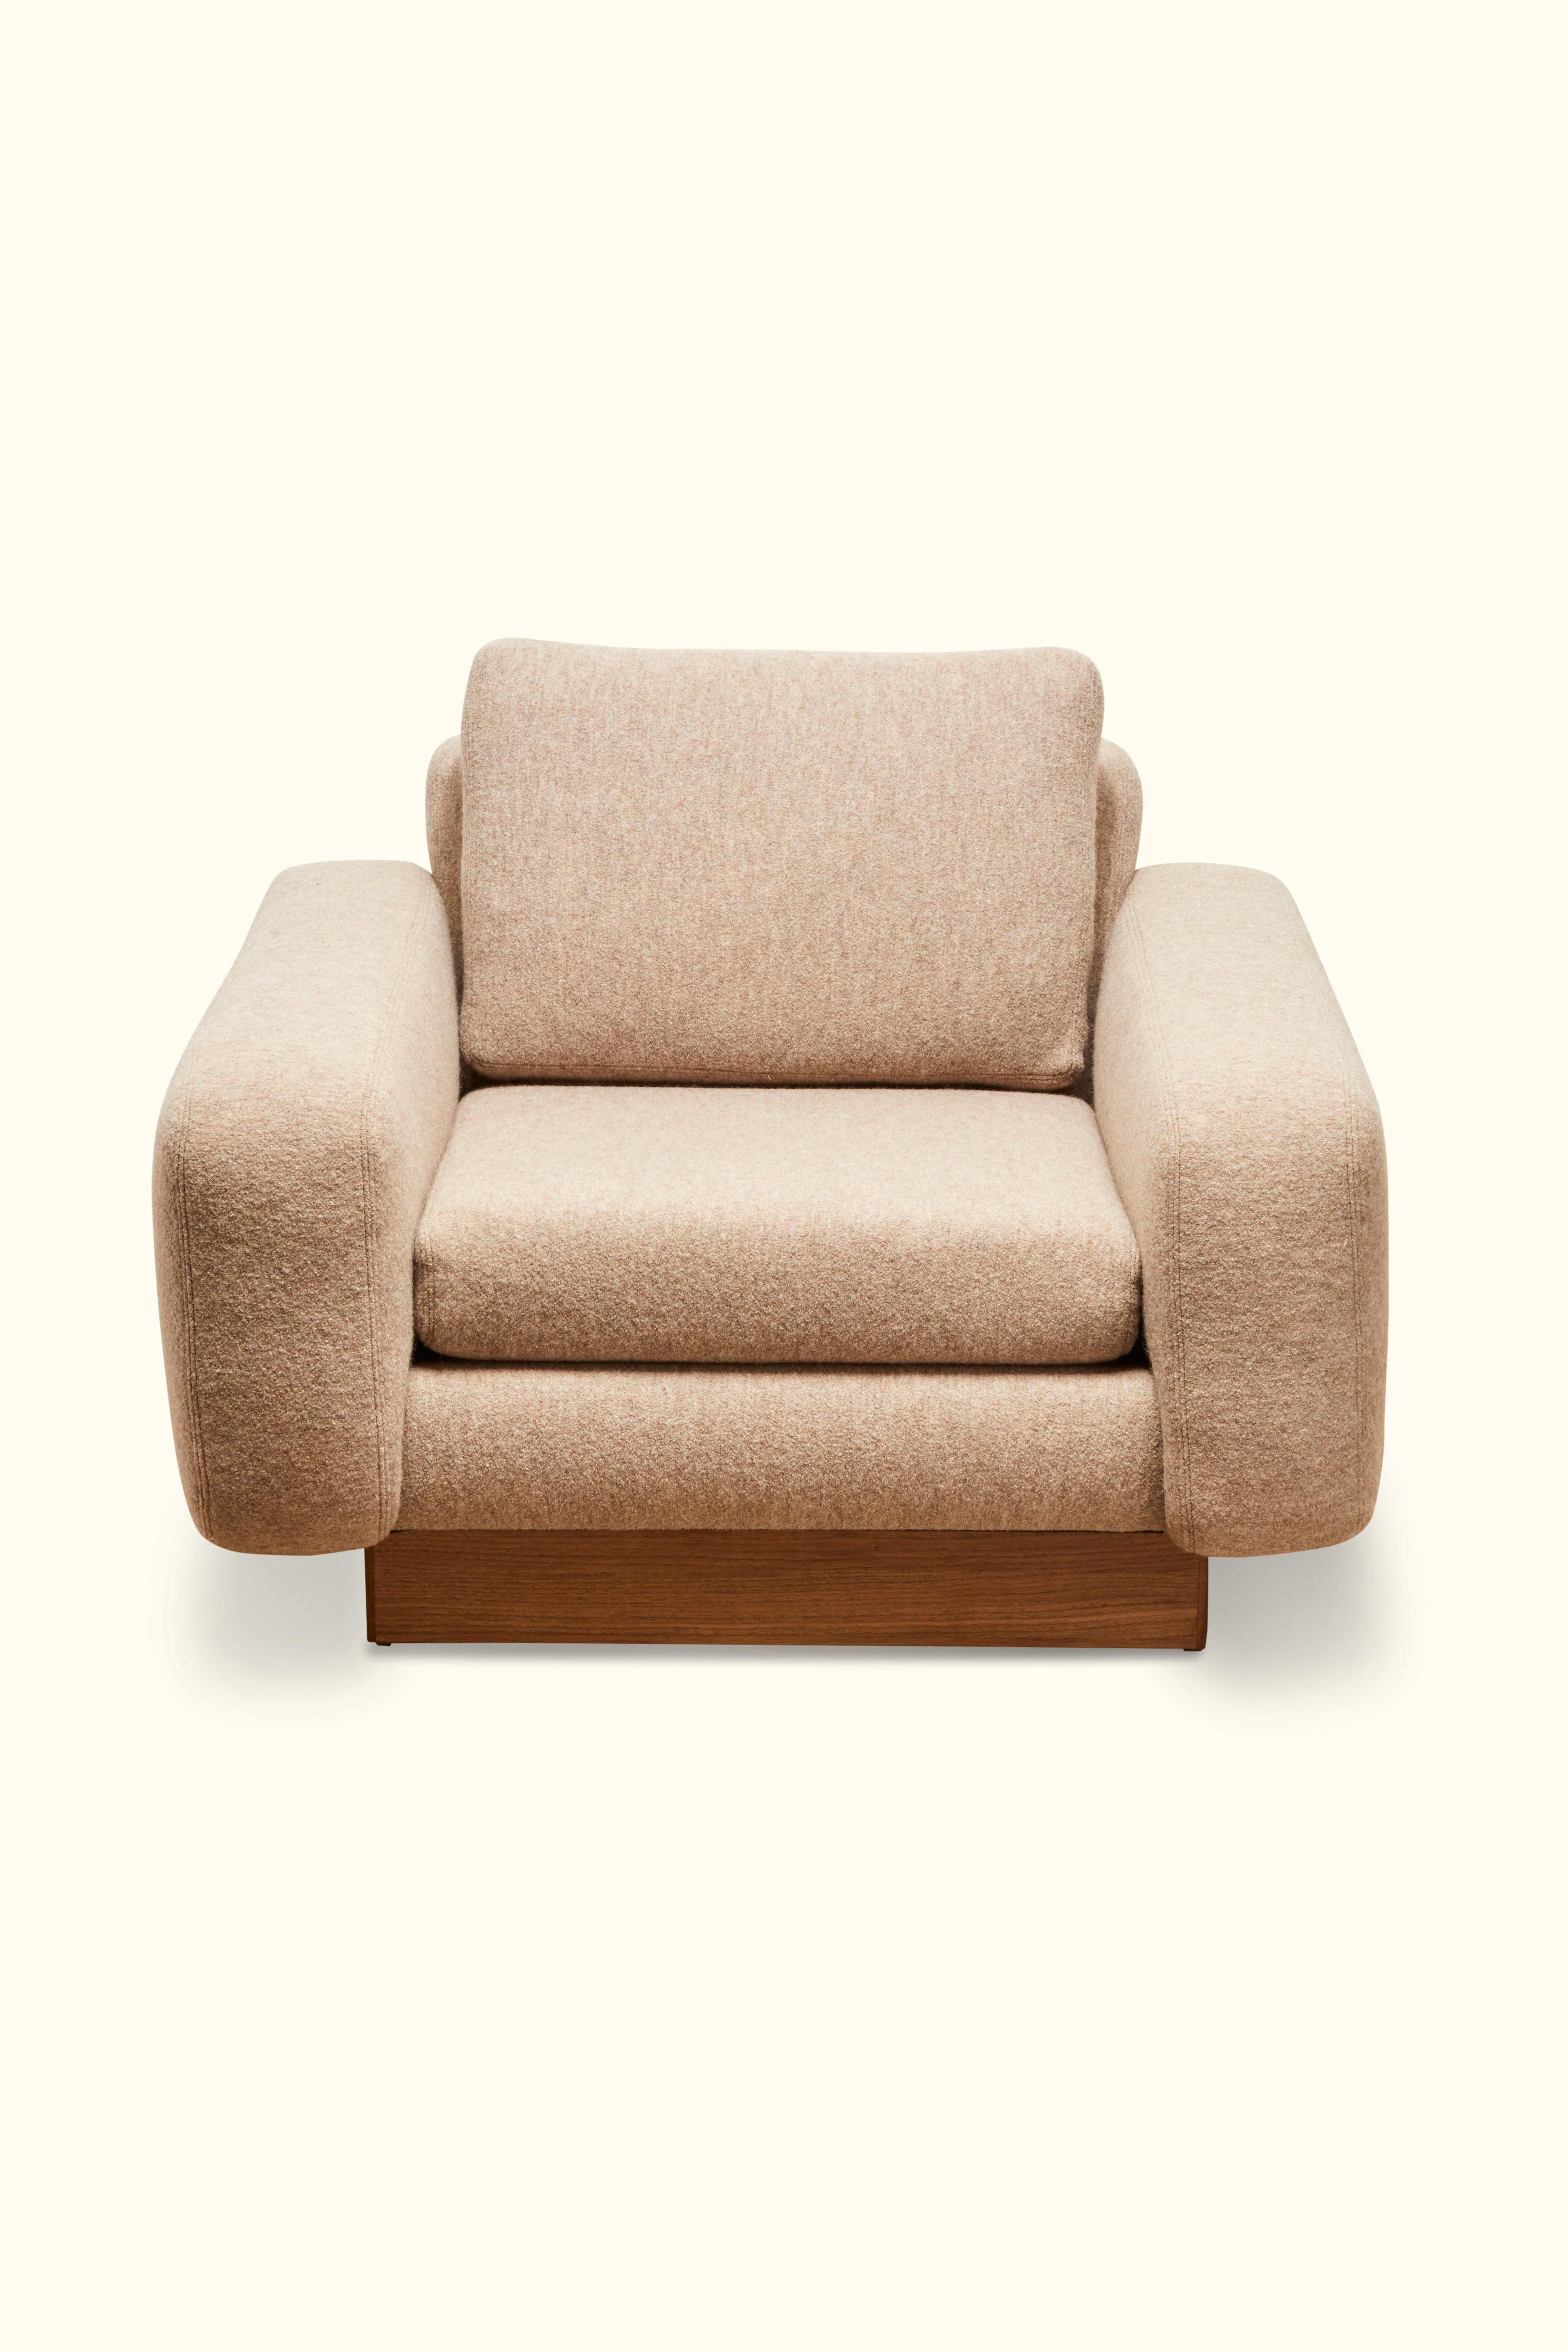 The Mesa lounge chair is a fully upholstered club chair that features a walnut or oak inset base.

Available to order in COM with a 6-8 week lead time. 

As shown: $3,320
To order: 1,850 + COM.